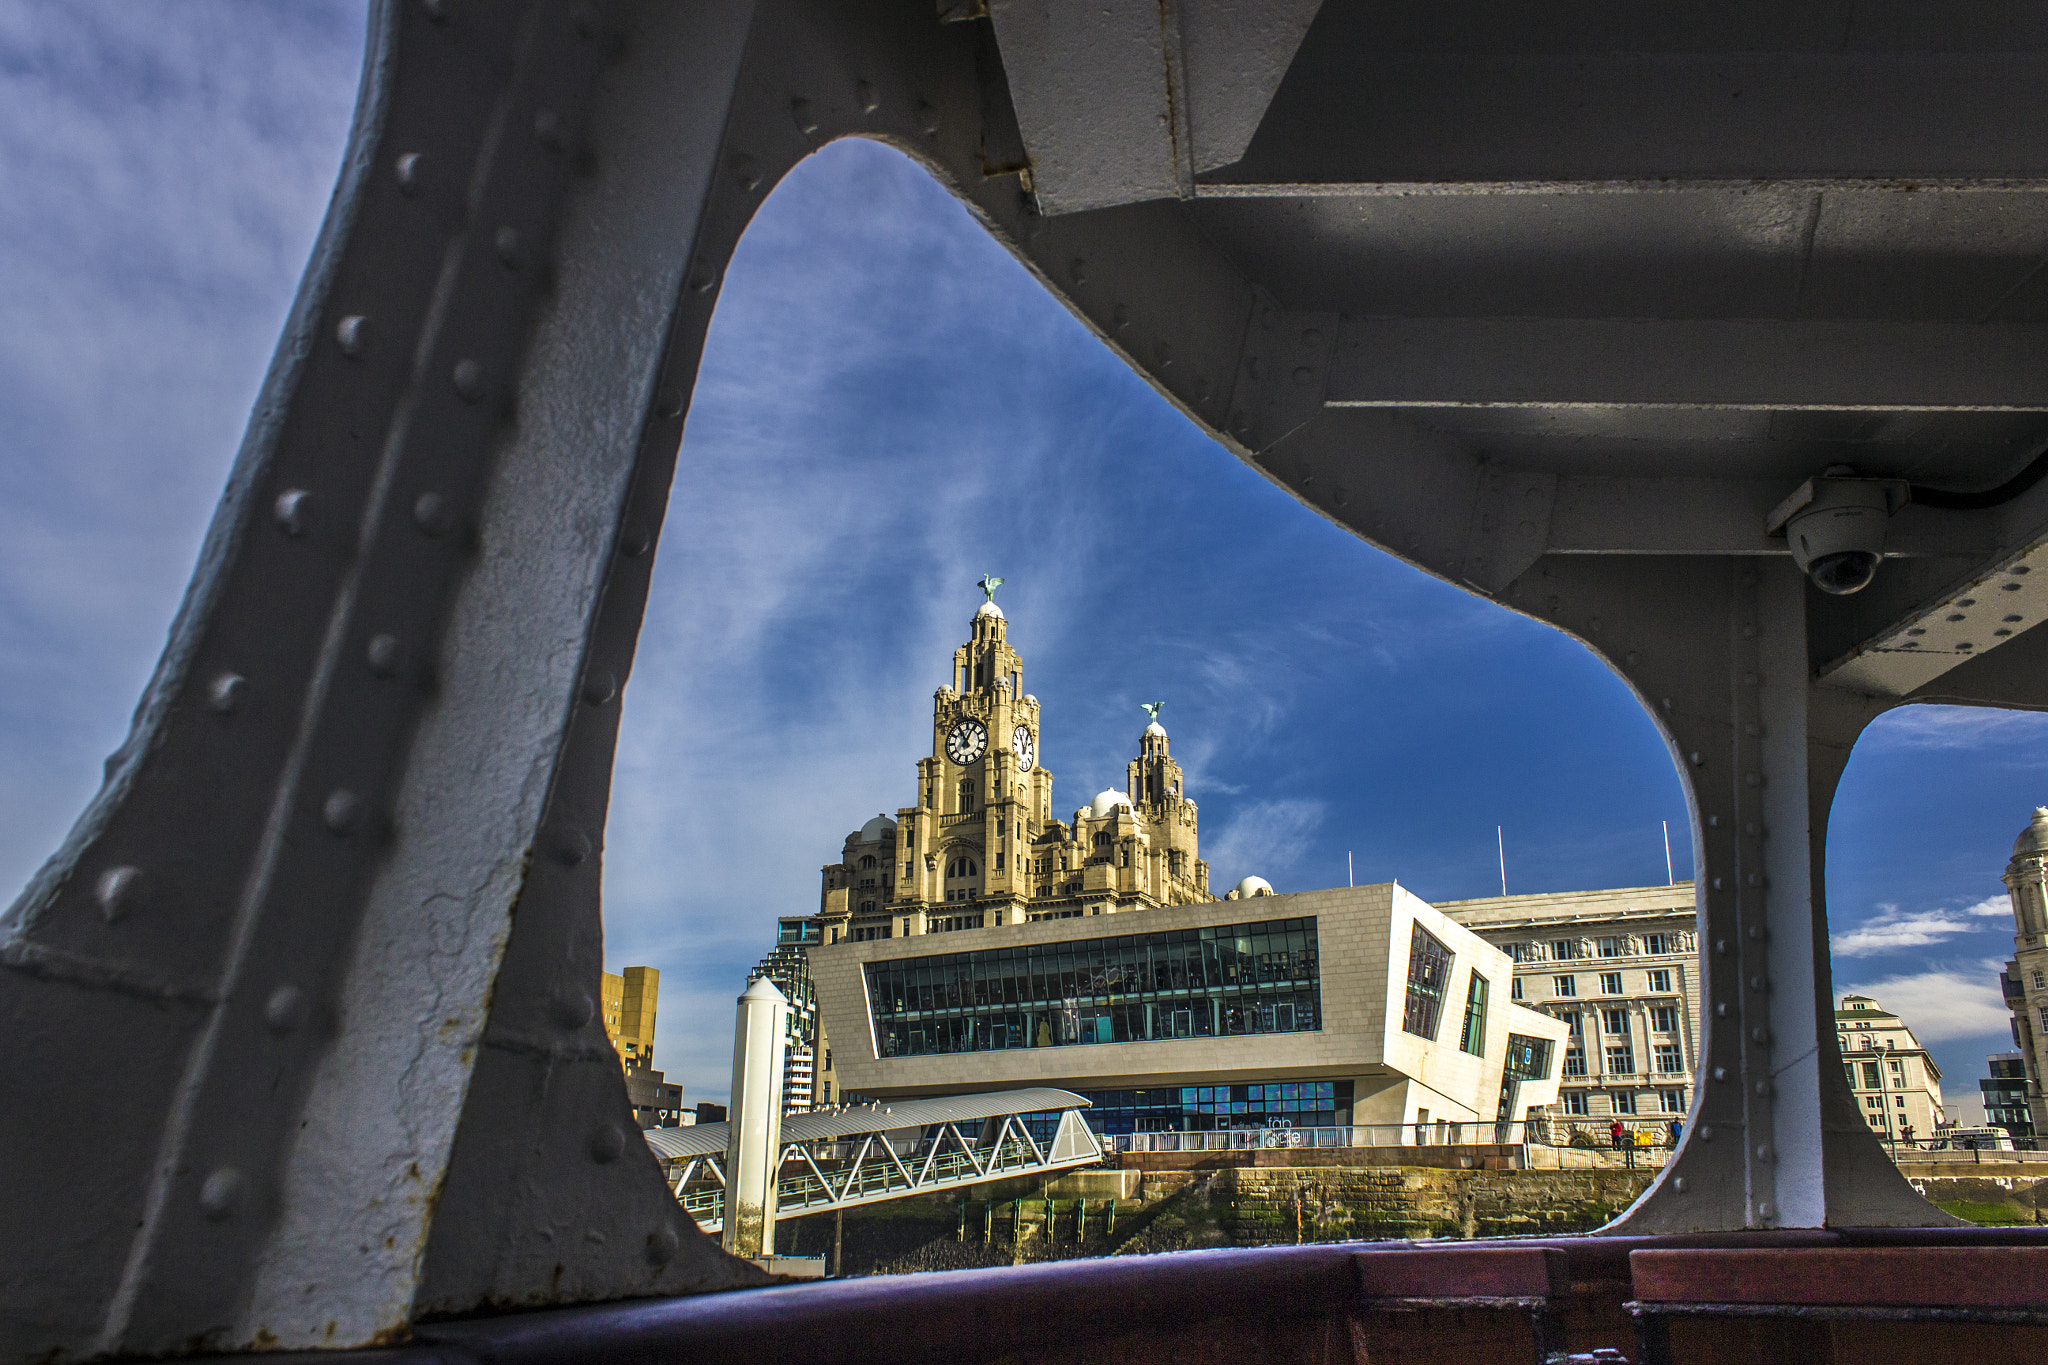 Liver Building from the Mersey Ferry